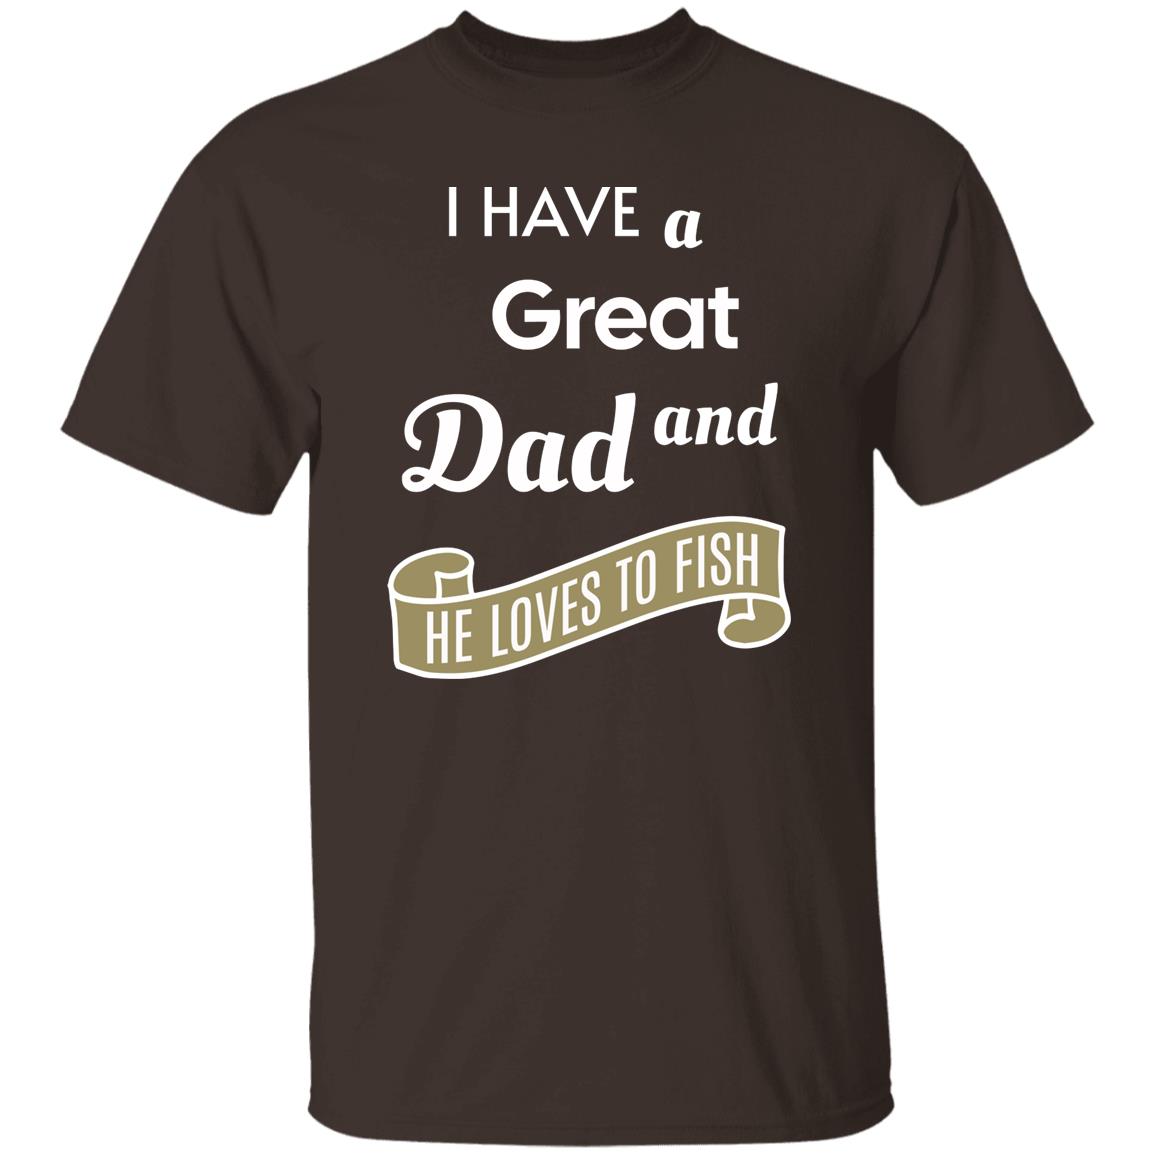 I have a great dad and he loves fishing k t-shirt dark-choclate